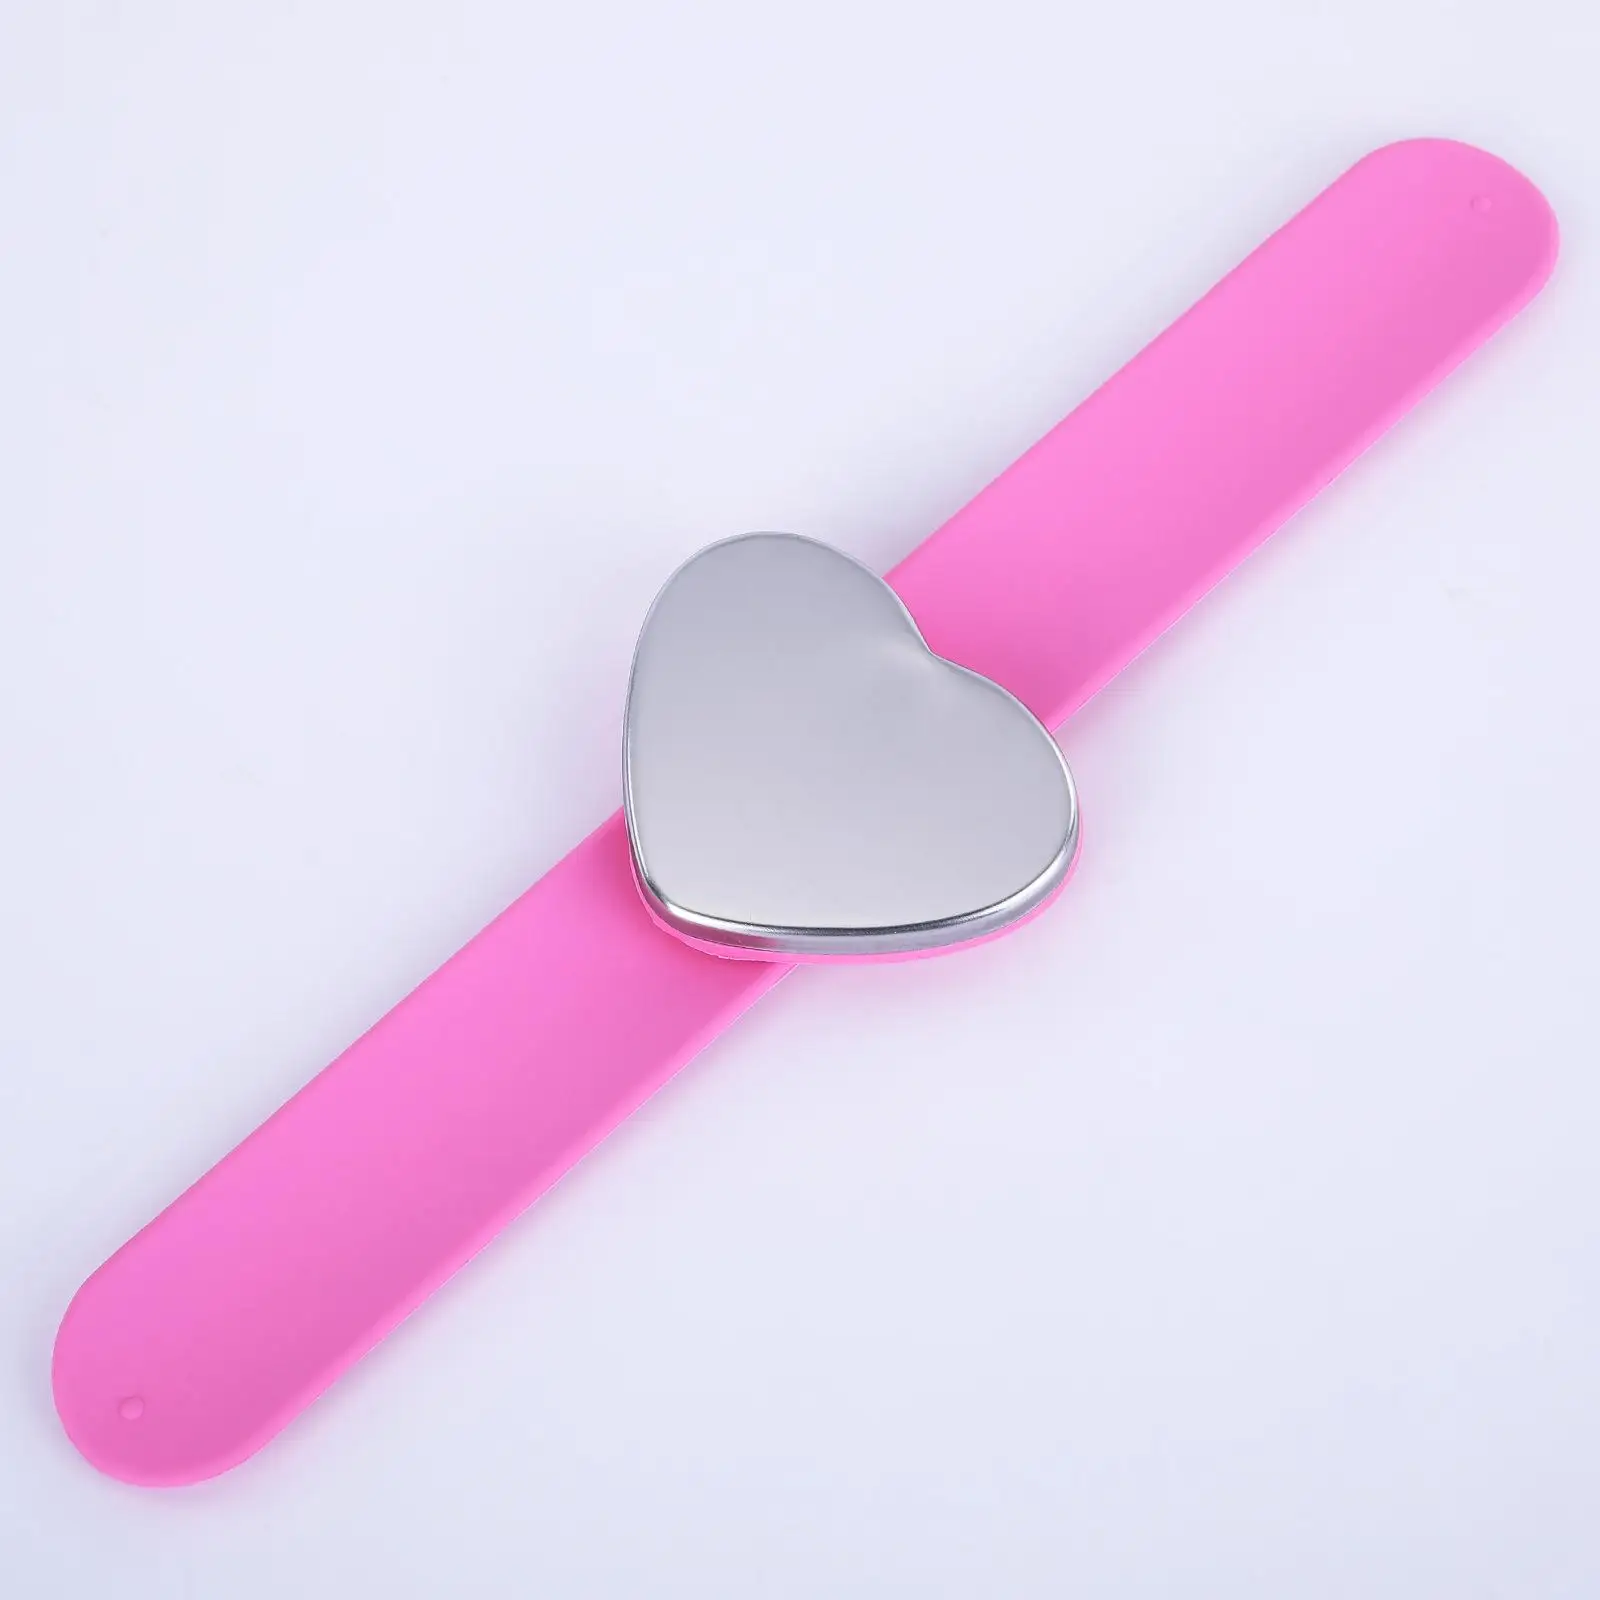 Magnetic Wrist Sewing Pincushion Slap Bracelet Quilting Embroidery Supplies Wristband Salon Use